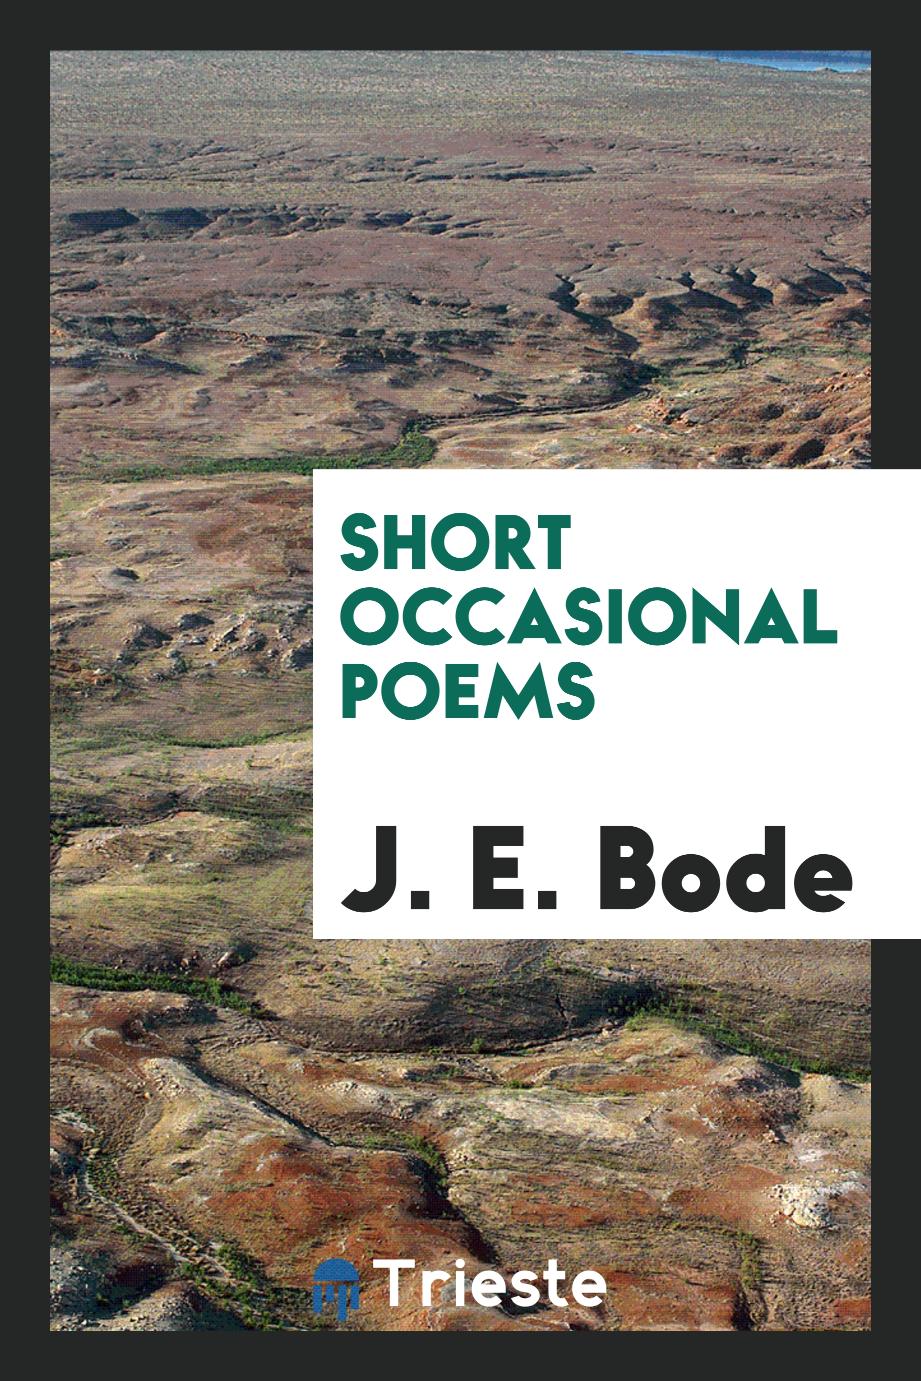 Short occasional poems